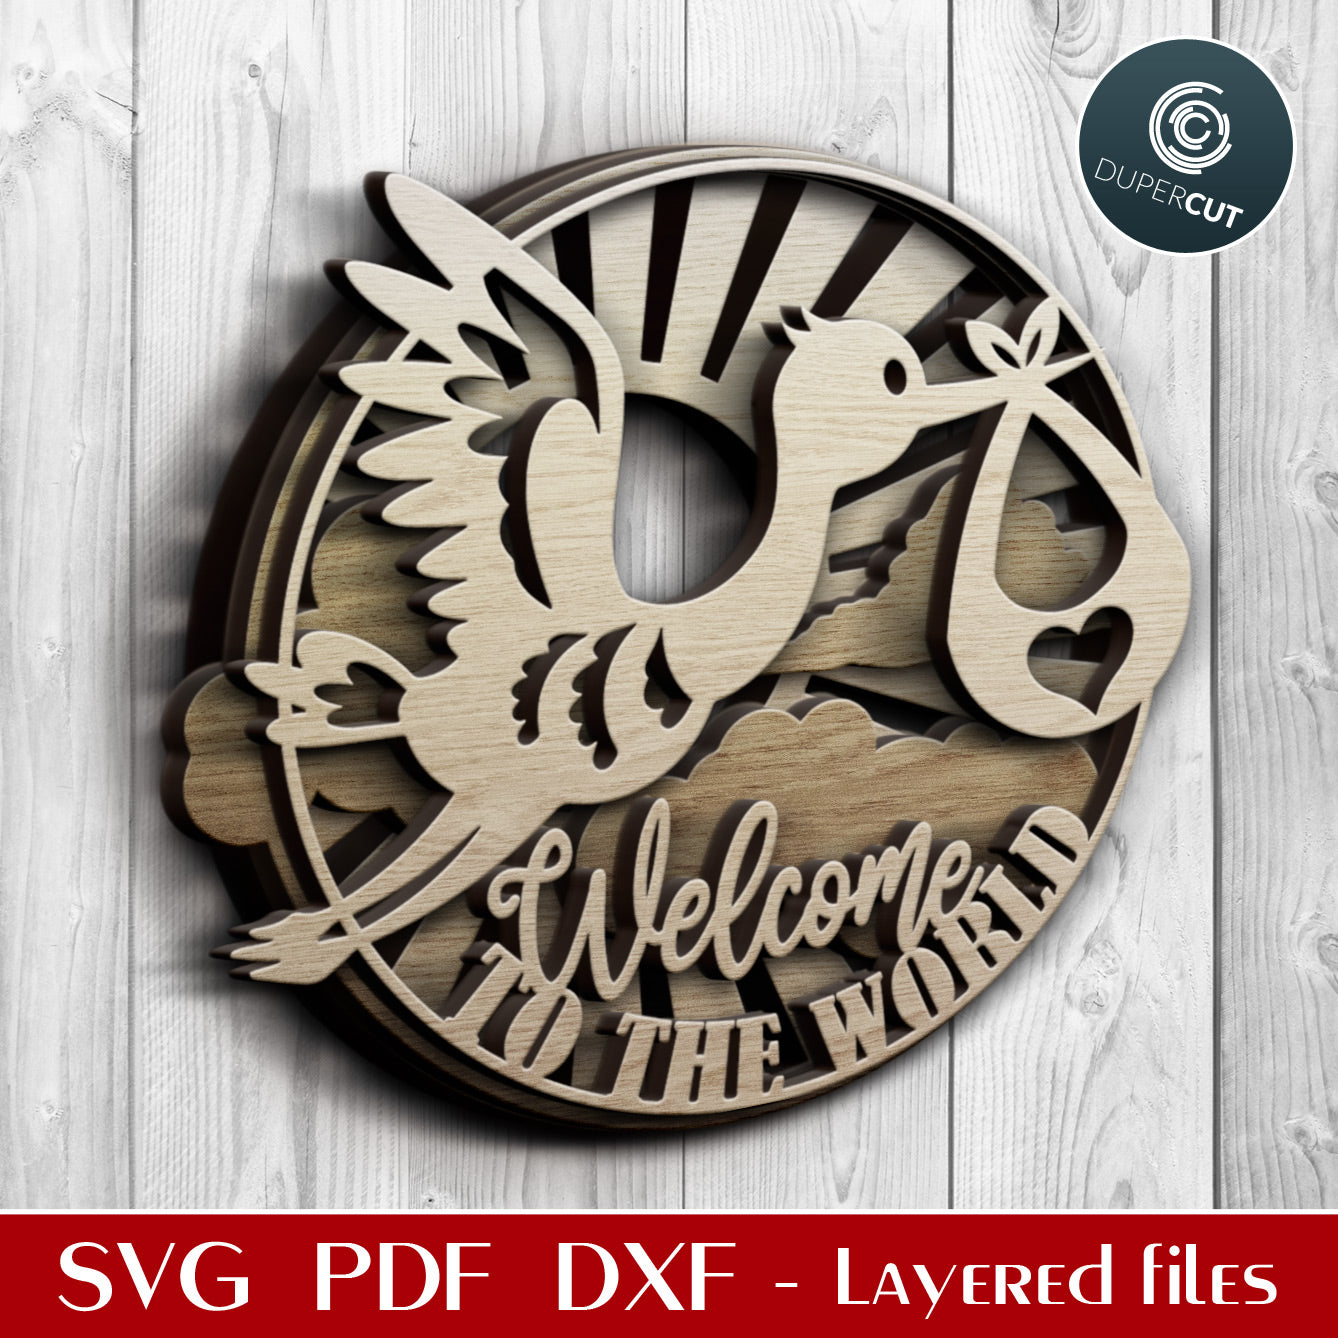 Stork carrying a newborn baby - Welcome to the world - layered laser files SVG PDF DXF for cutting with Glowforge, Cricut, Silhouette Cameo, CNC machines